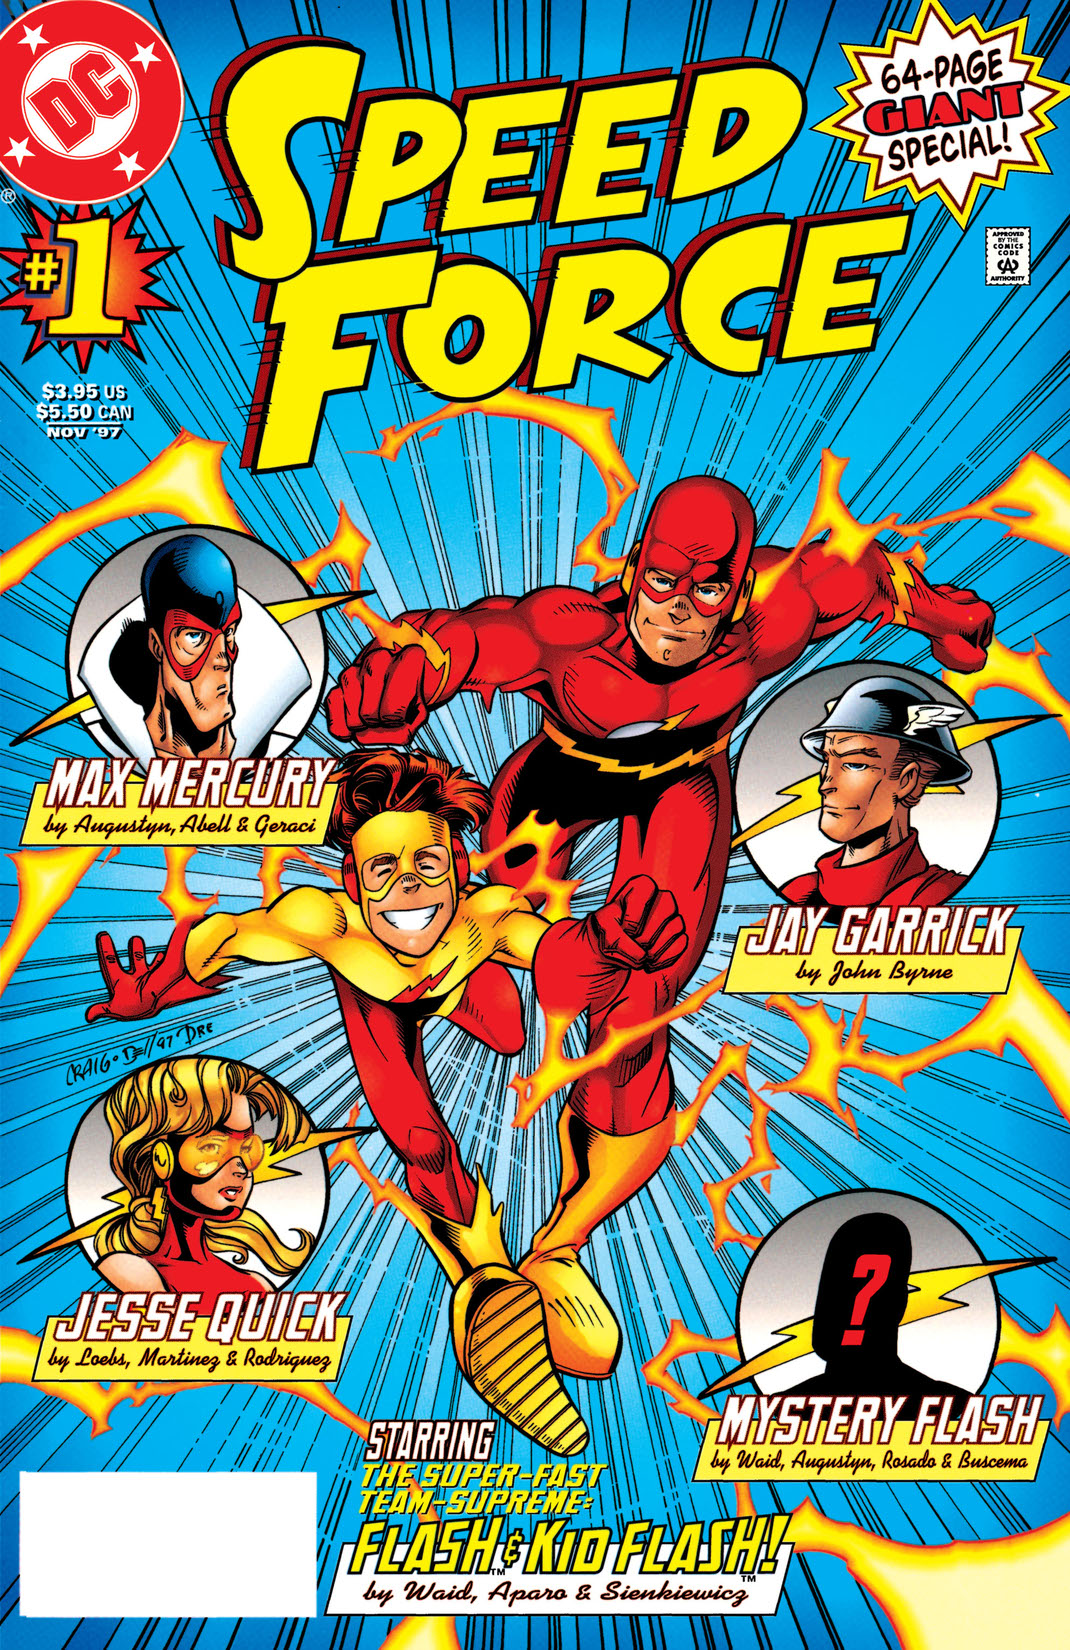 Speed Force #1 preview images